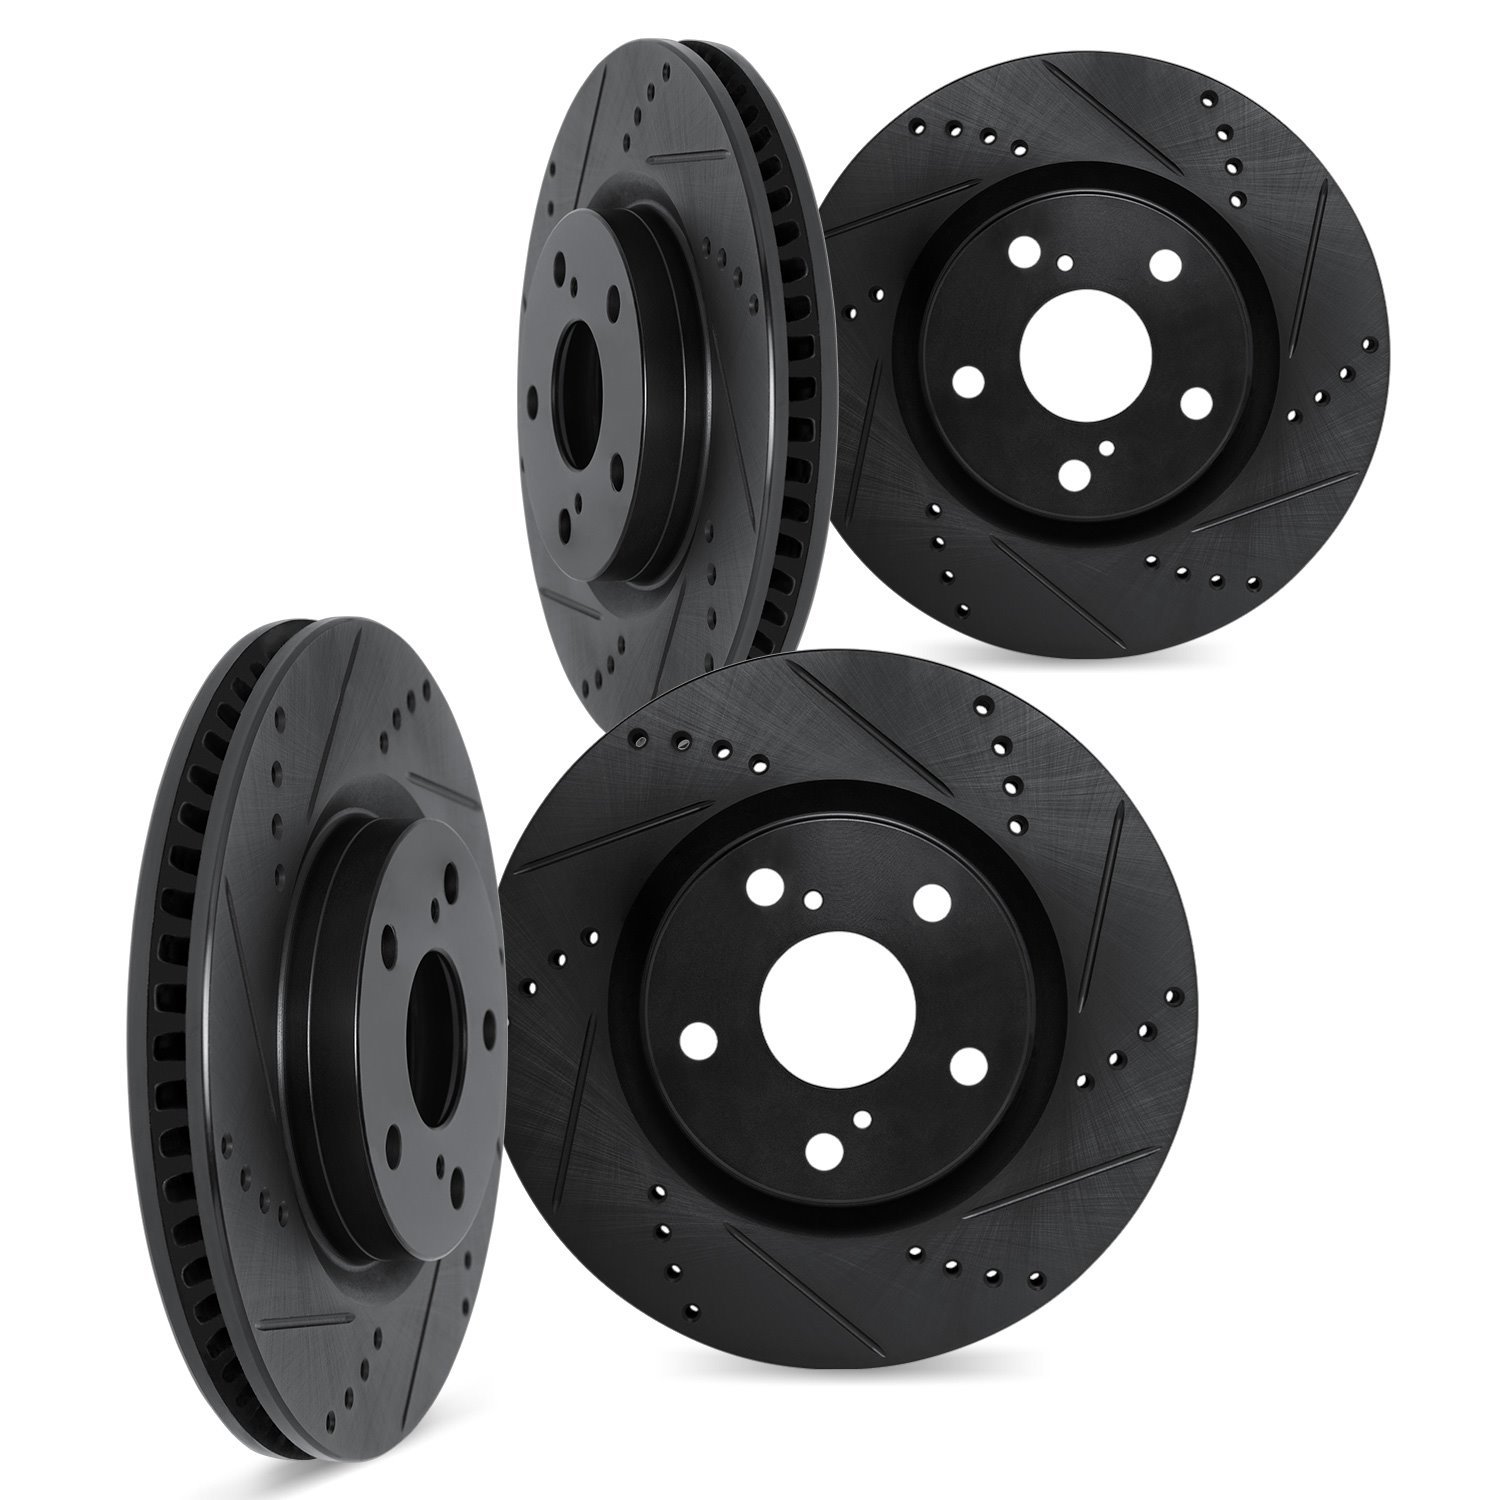 8004-11023 Drilled/Slotted Brake Rotors [Black], Fits Select Land Rover, Position: Front and Rear